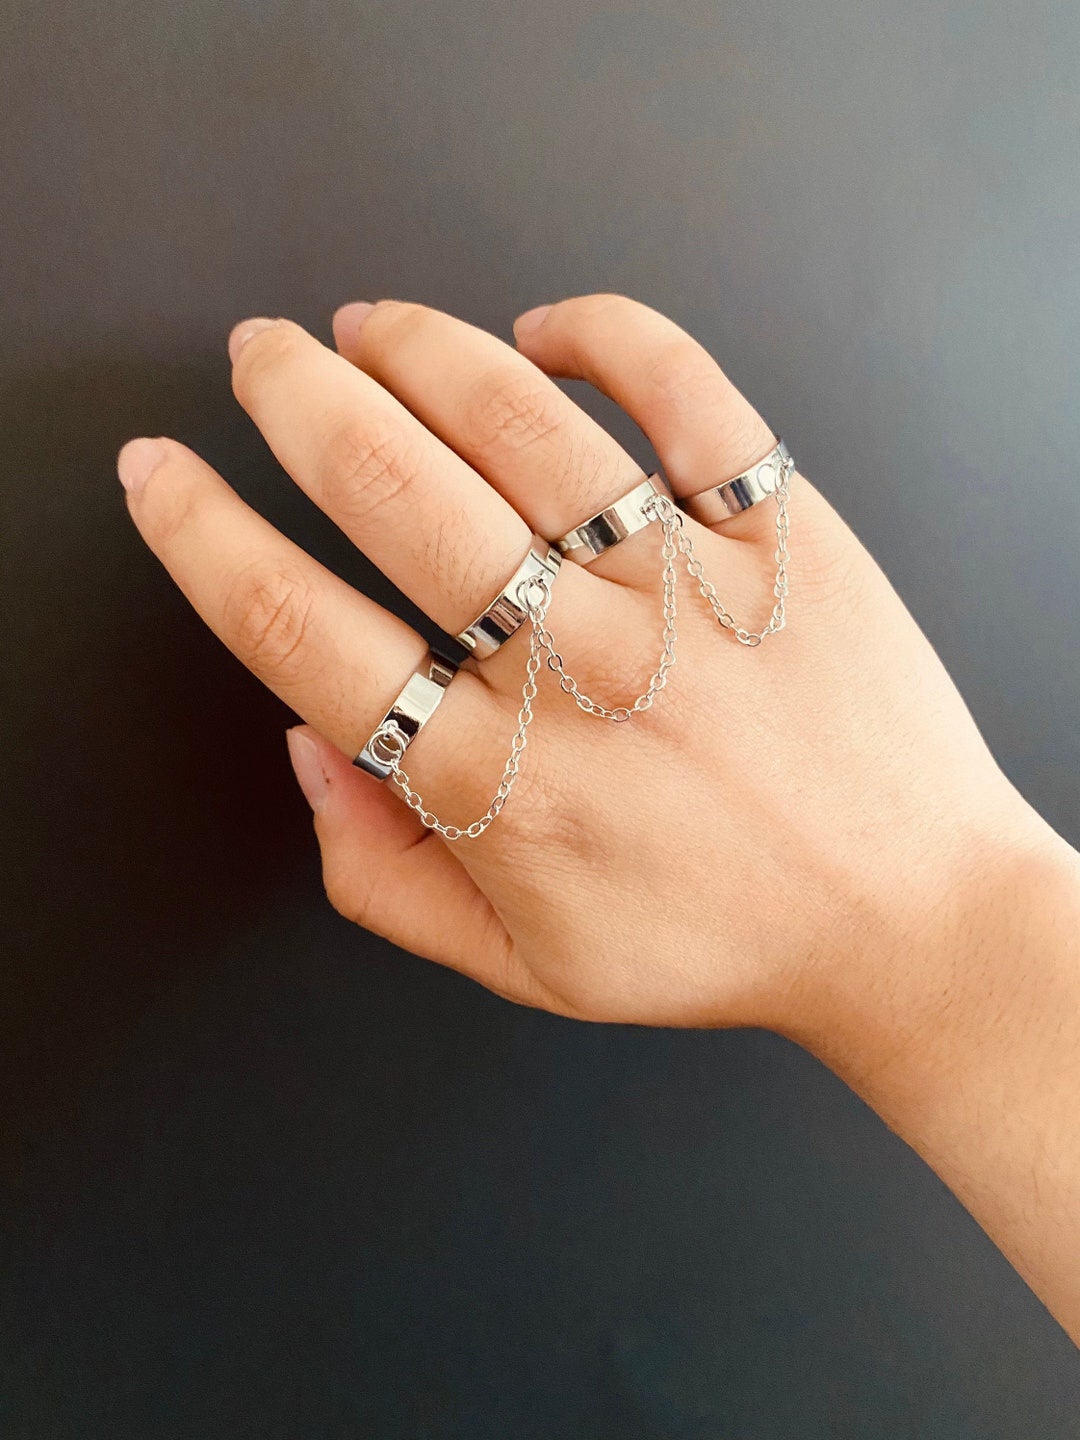 Handmade Five Finger Chain Rings | Adjustable Chain Linked Cuff Rings